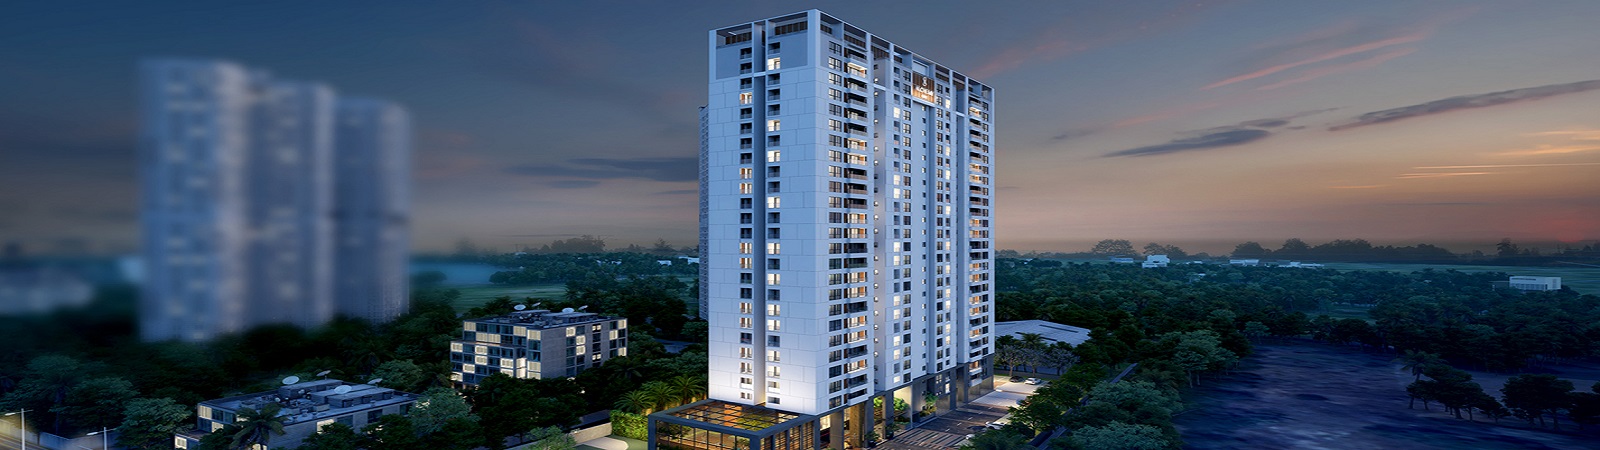  Conscient Hines Sector 62 Gurgaon Banner Image